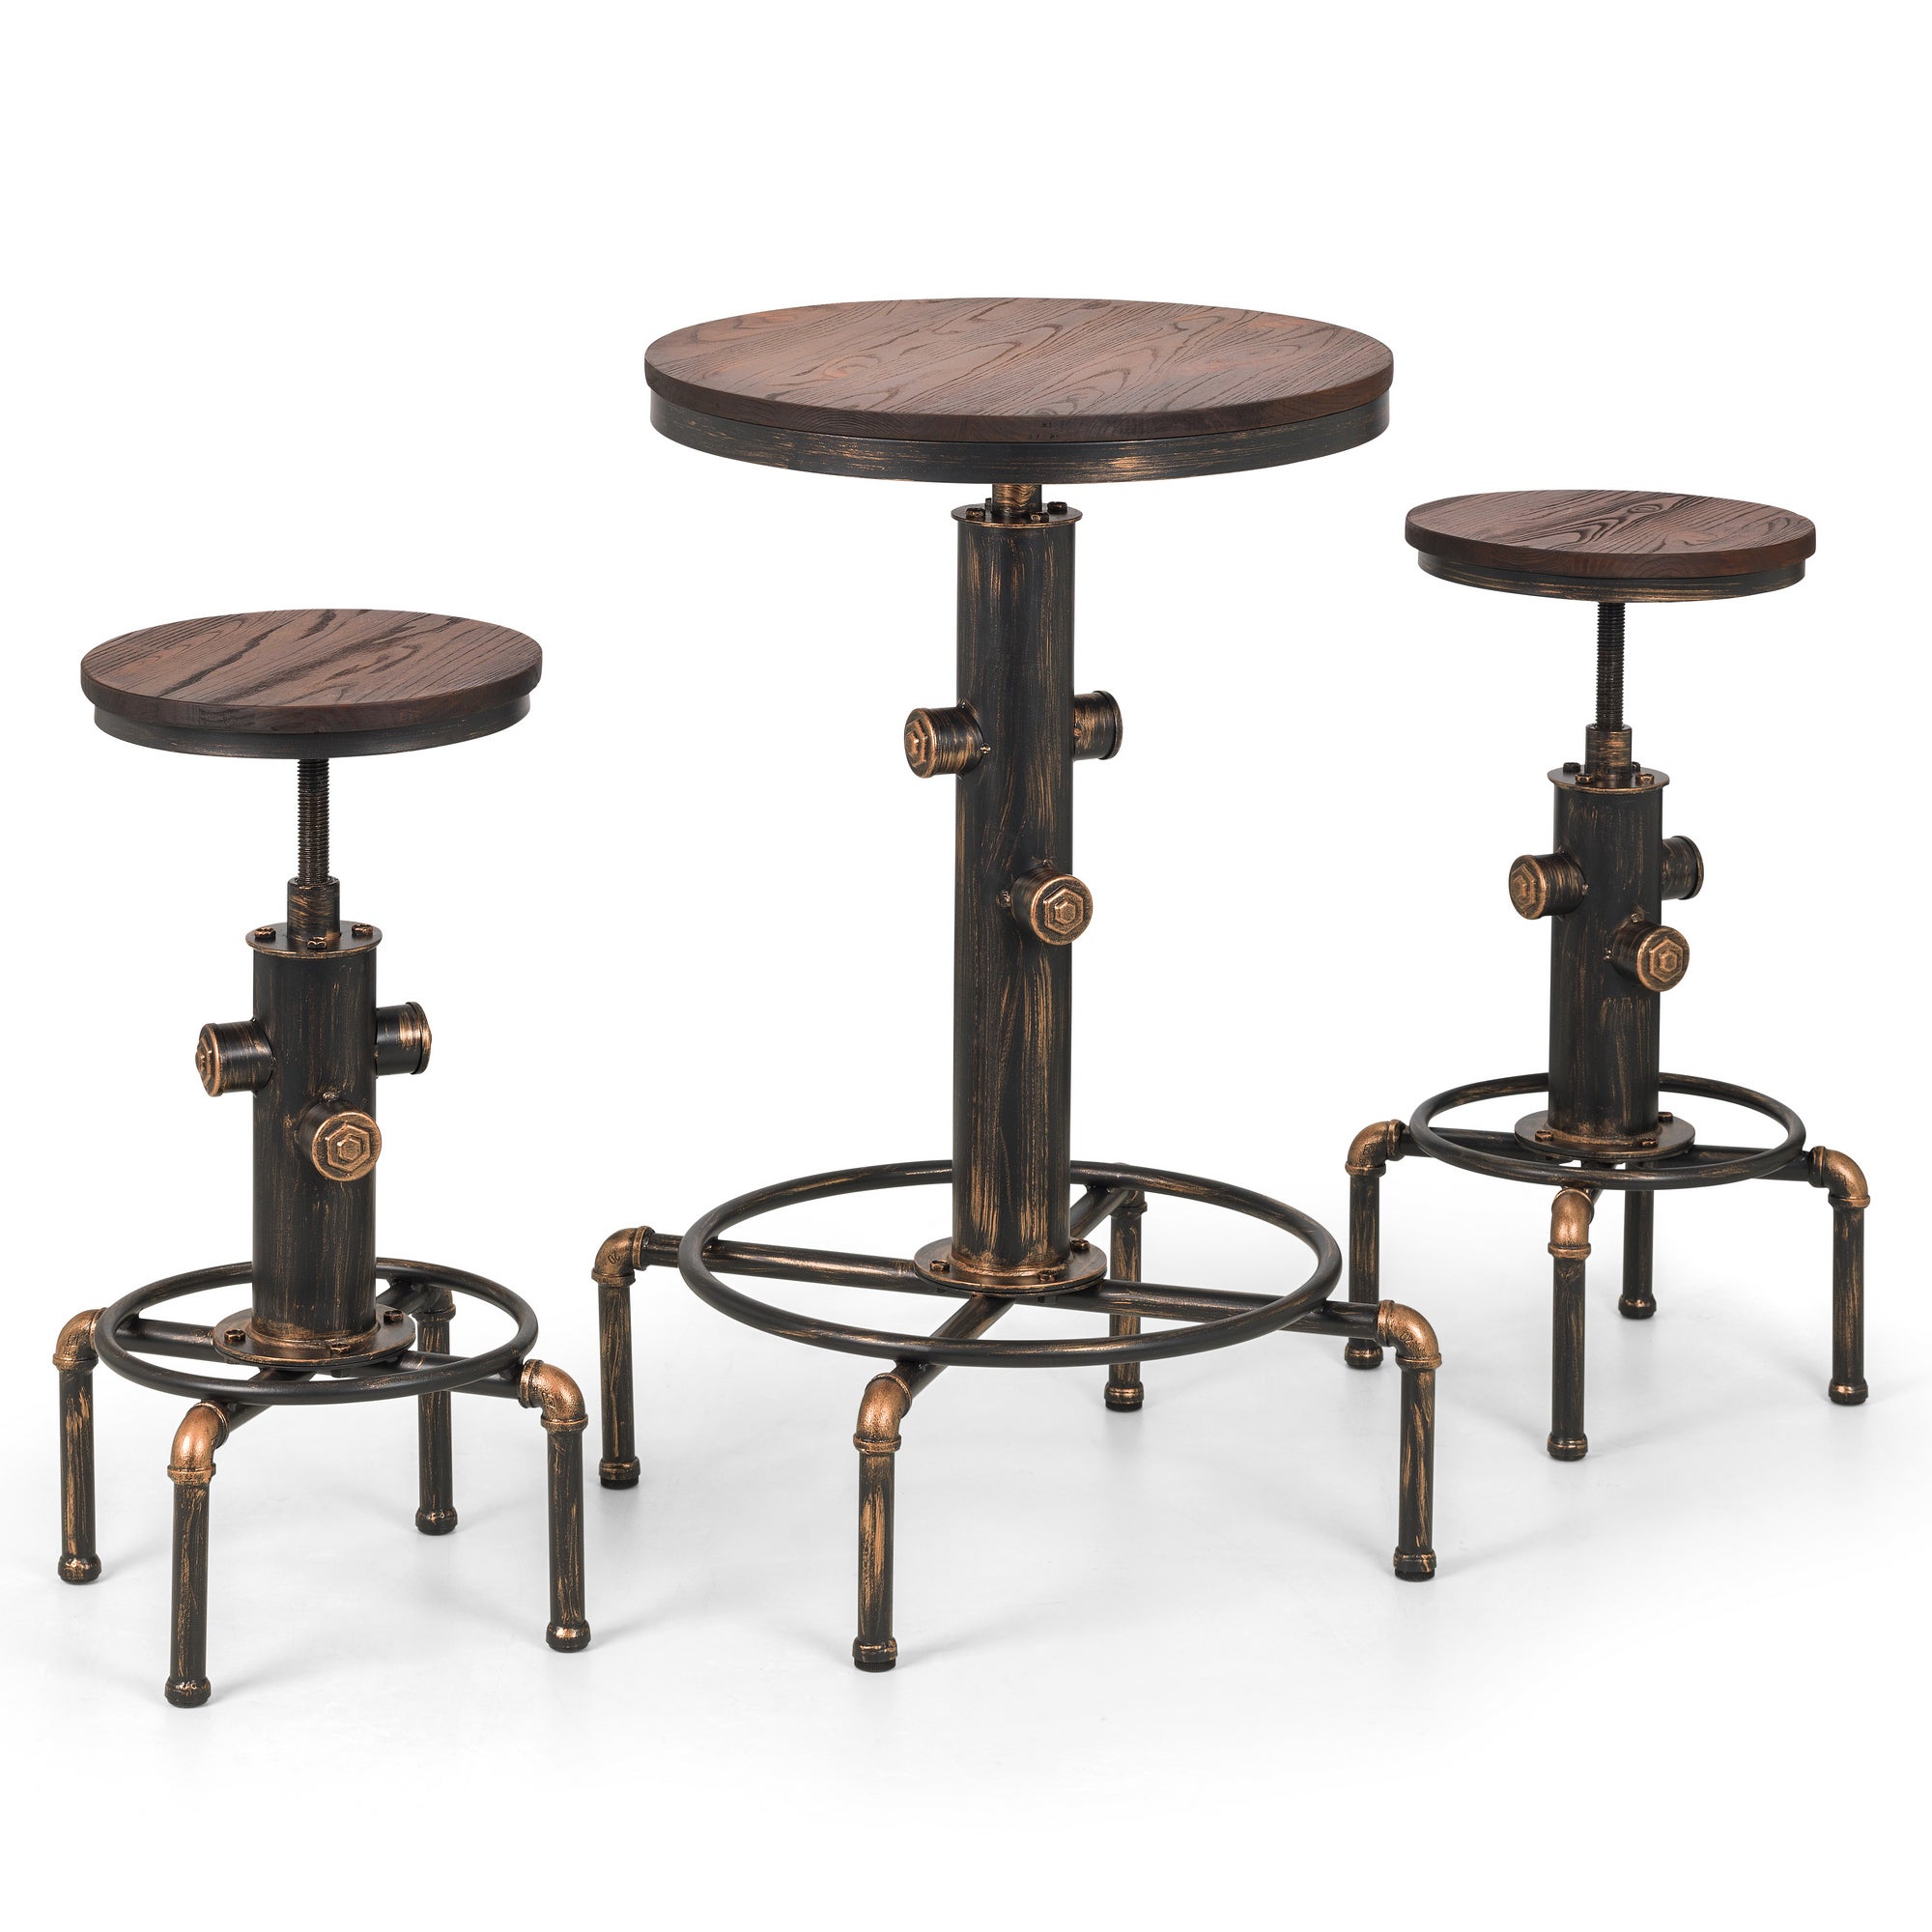 Rockport Round Bar Table With 2 Stools Brown